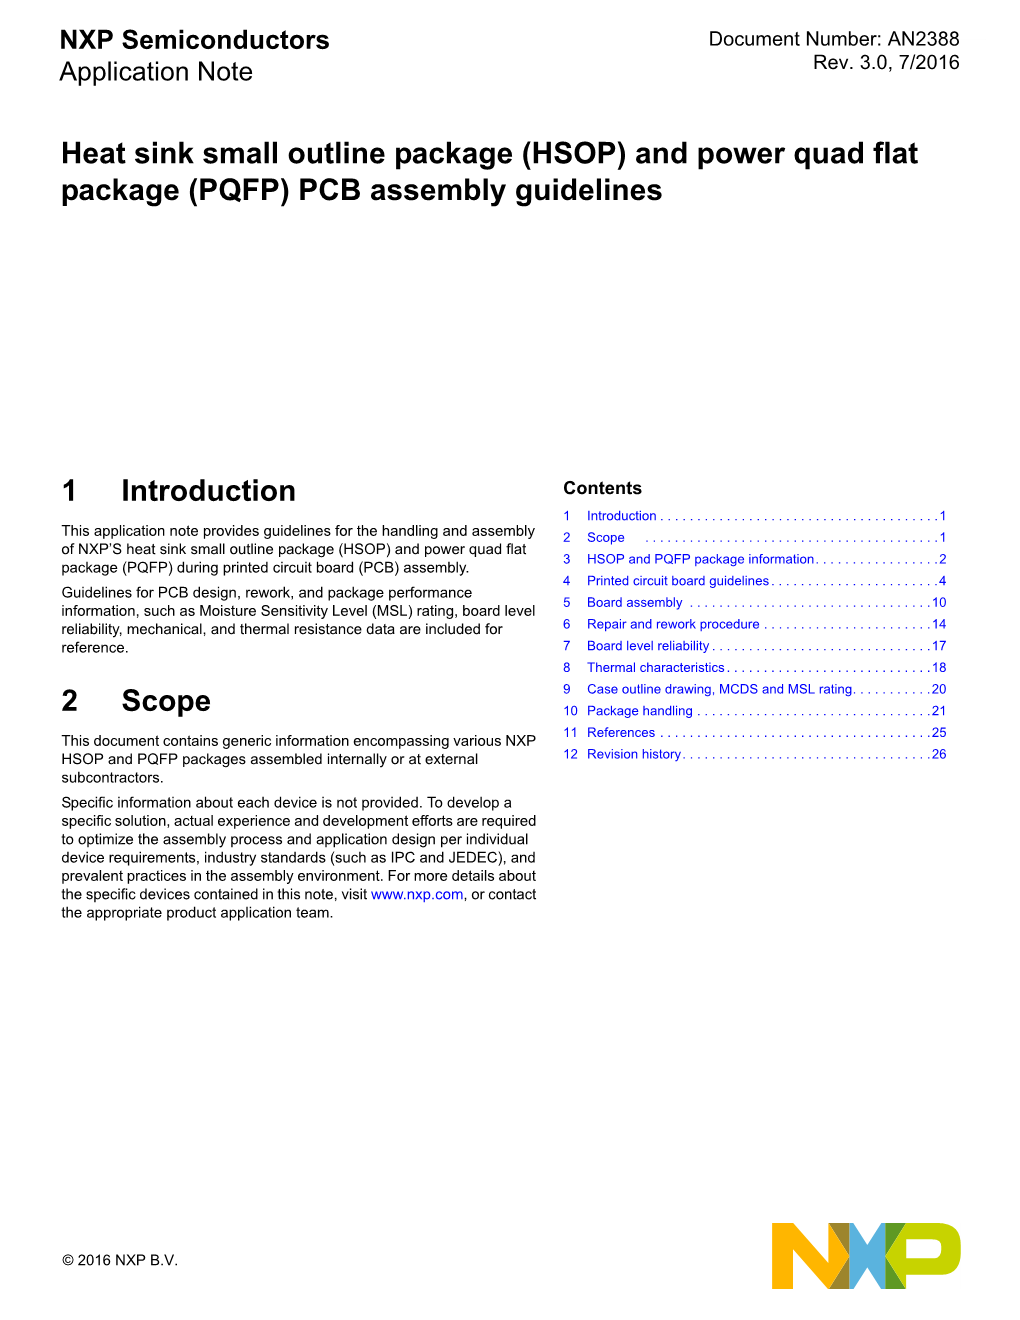 (HSOP) and Power Quad Flat Package (PQFP) PCB Assembly Guidelines